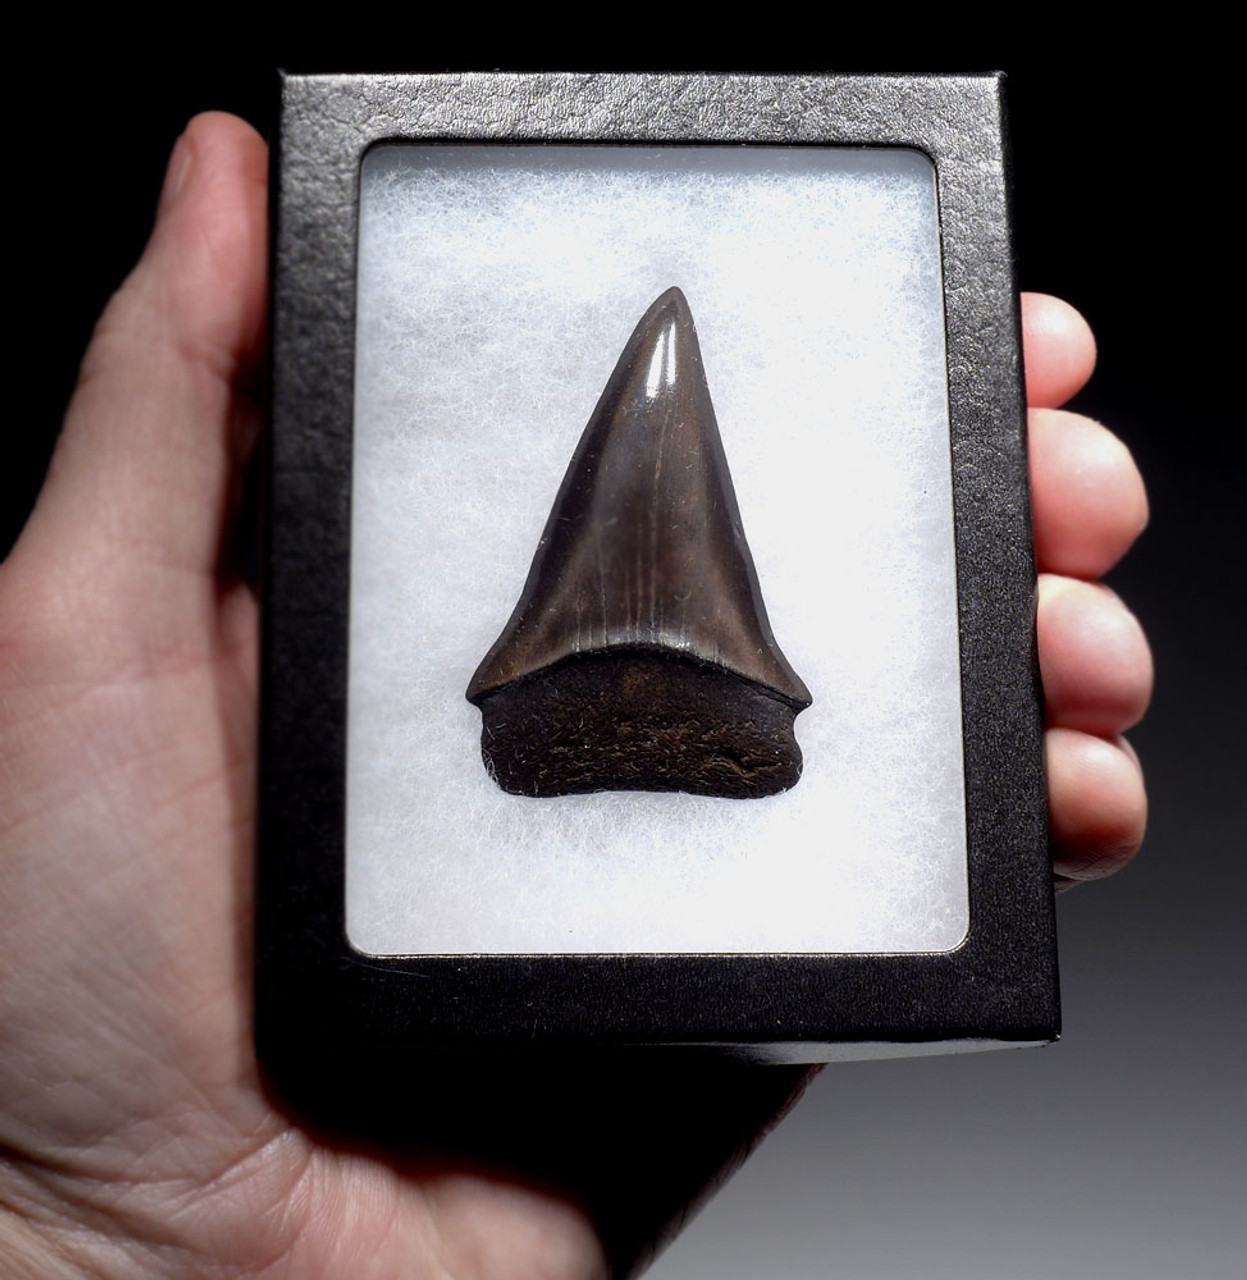 LARGE COLLECTOR GRADE 2.45 INCH GEORGIA FOSSIL SHARK TOOTH OF ISURUS HASTALIS BROAD TOOTH MAKO WITH CHATOYANT PLATINUM ENAMEL  *SHX151